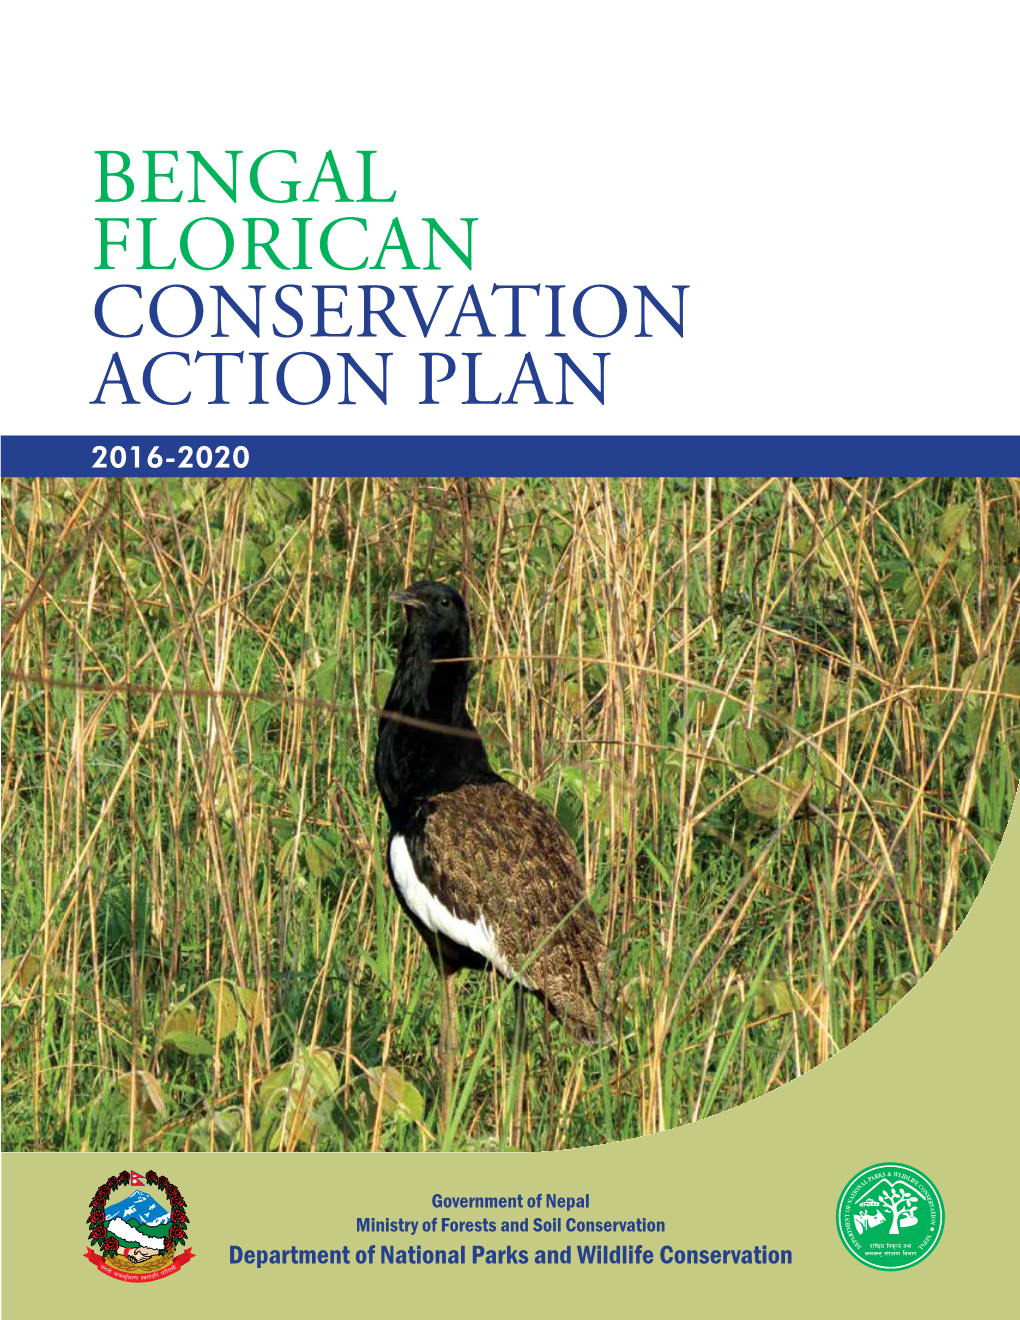 Bengal Florican Conservation Action Plan 2016-2020